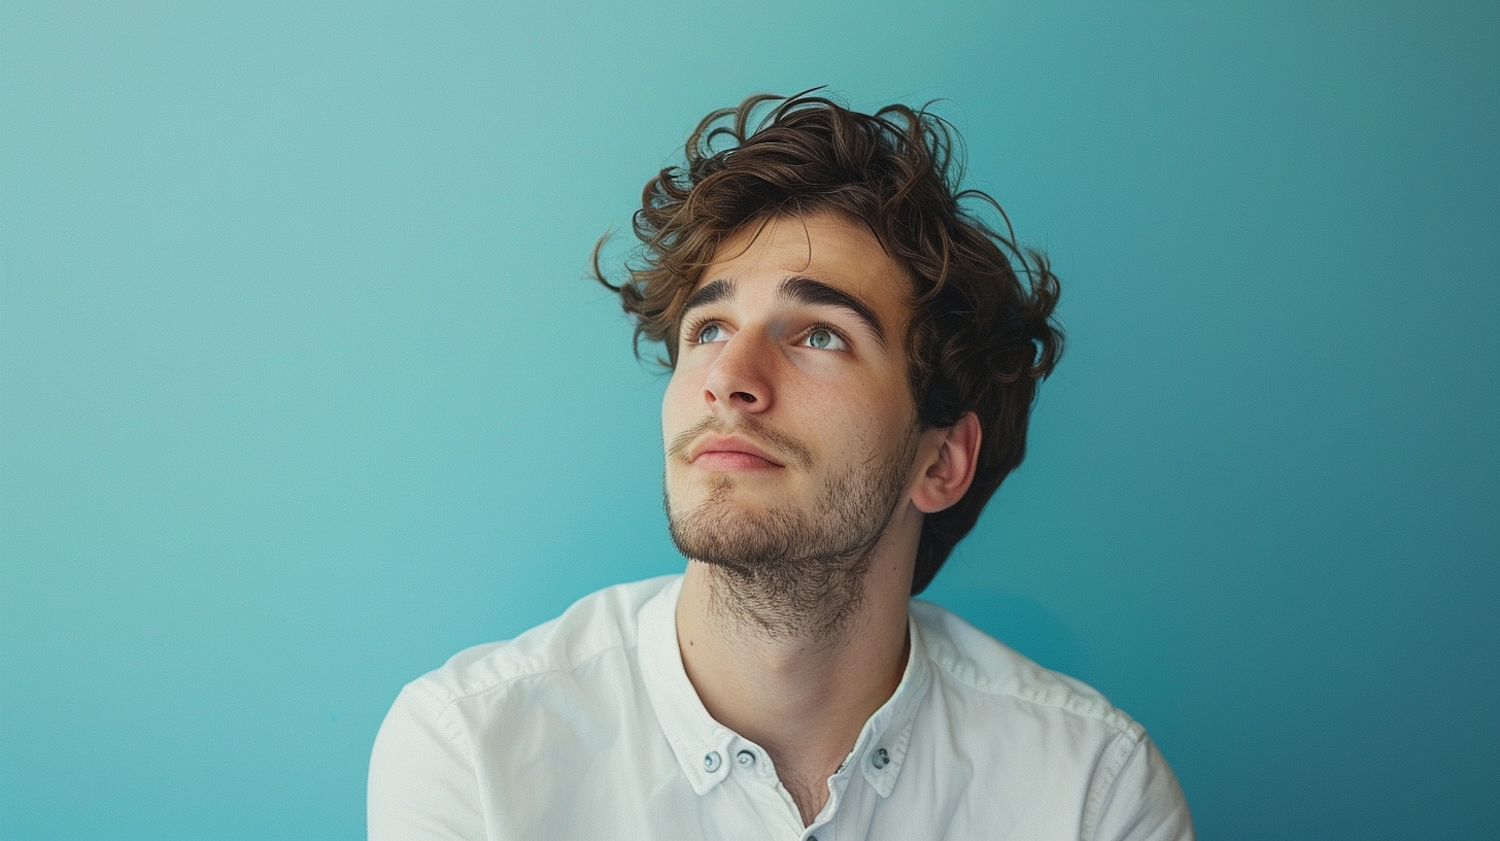 Contemplative Young Man with Teal Background